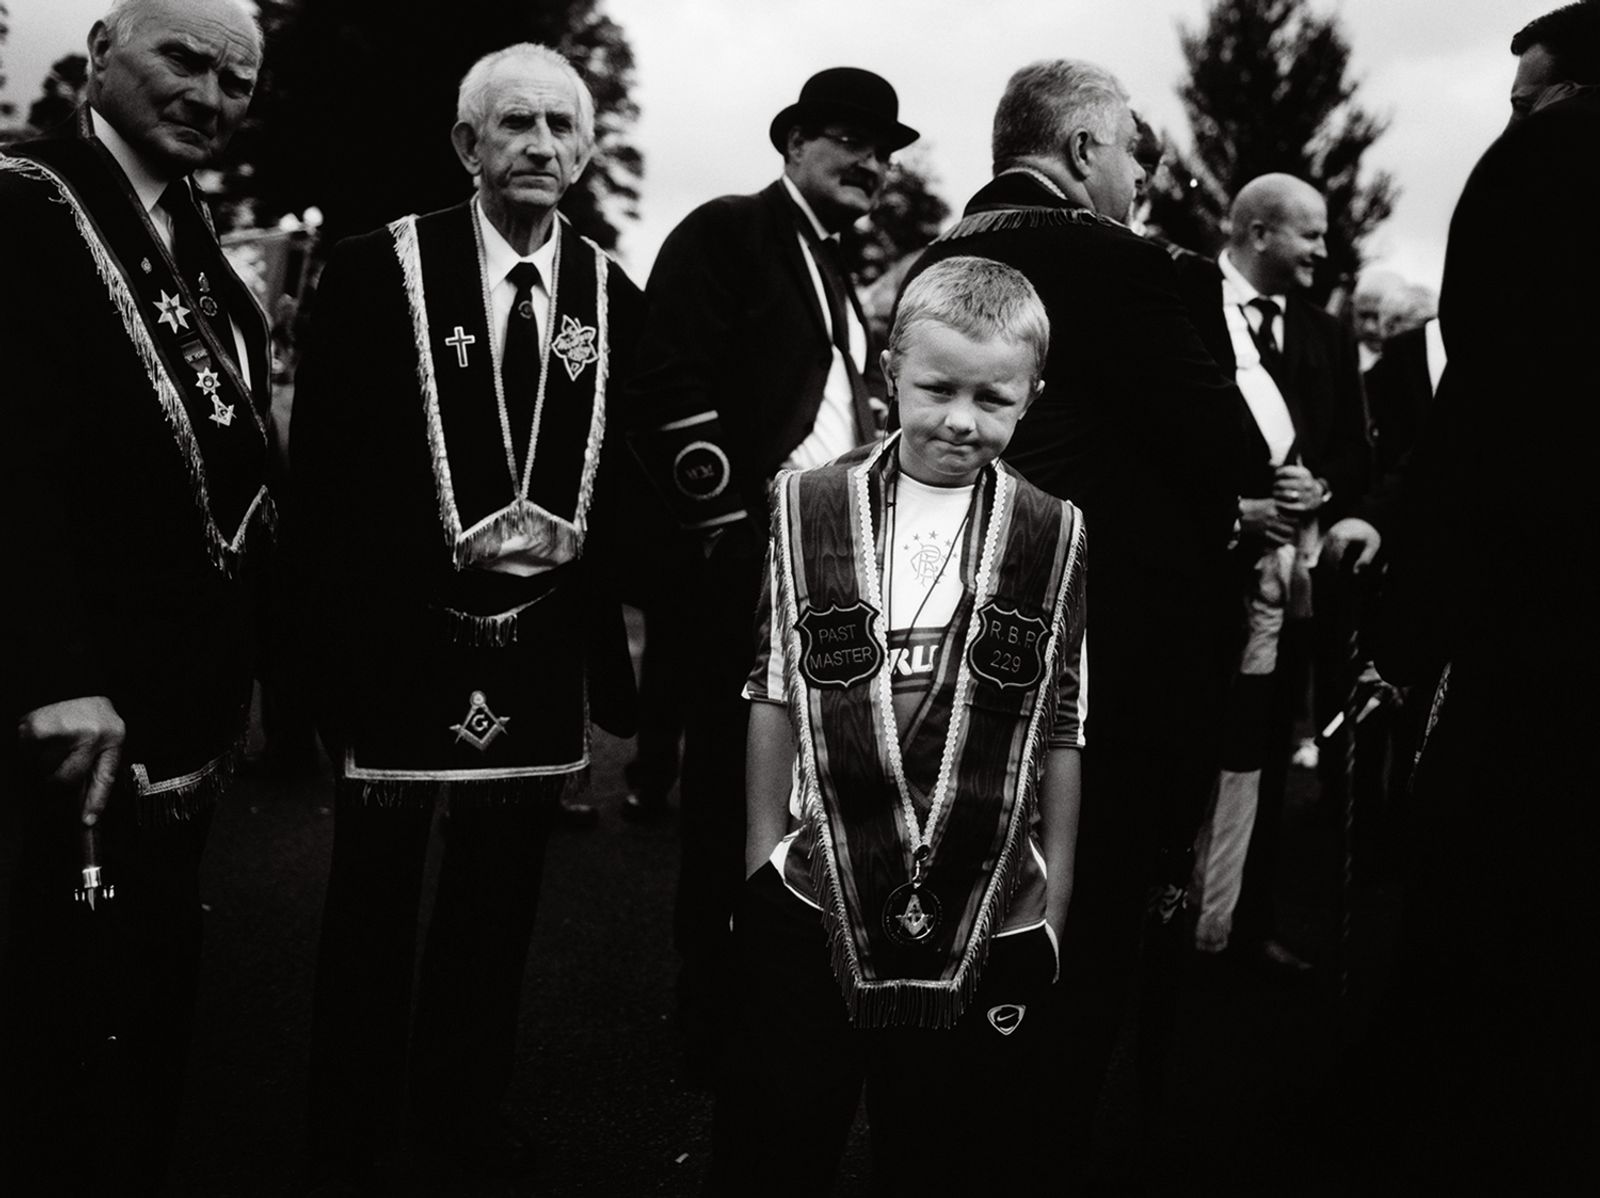 © Toby Binder - Belfast, Shankill. Young boy and old men at a Protestant parade.